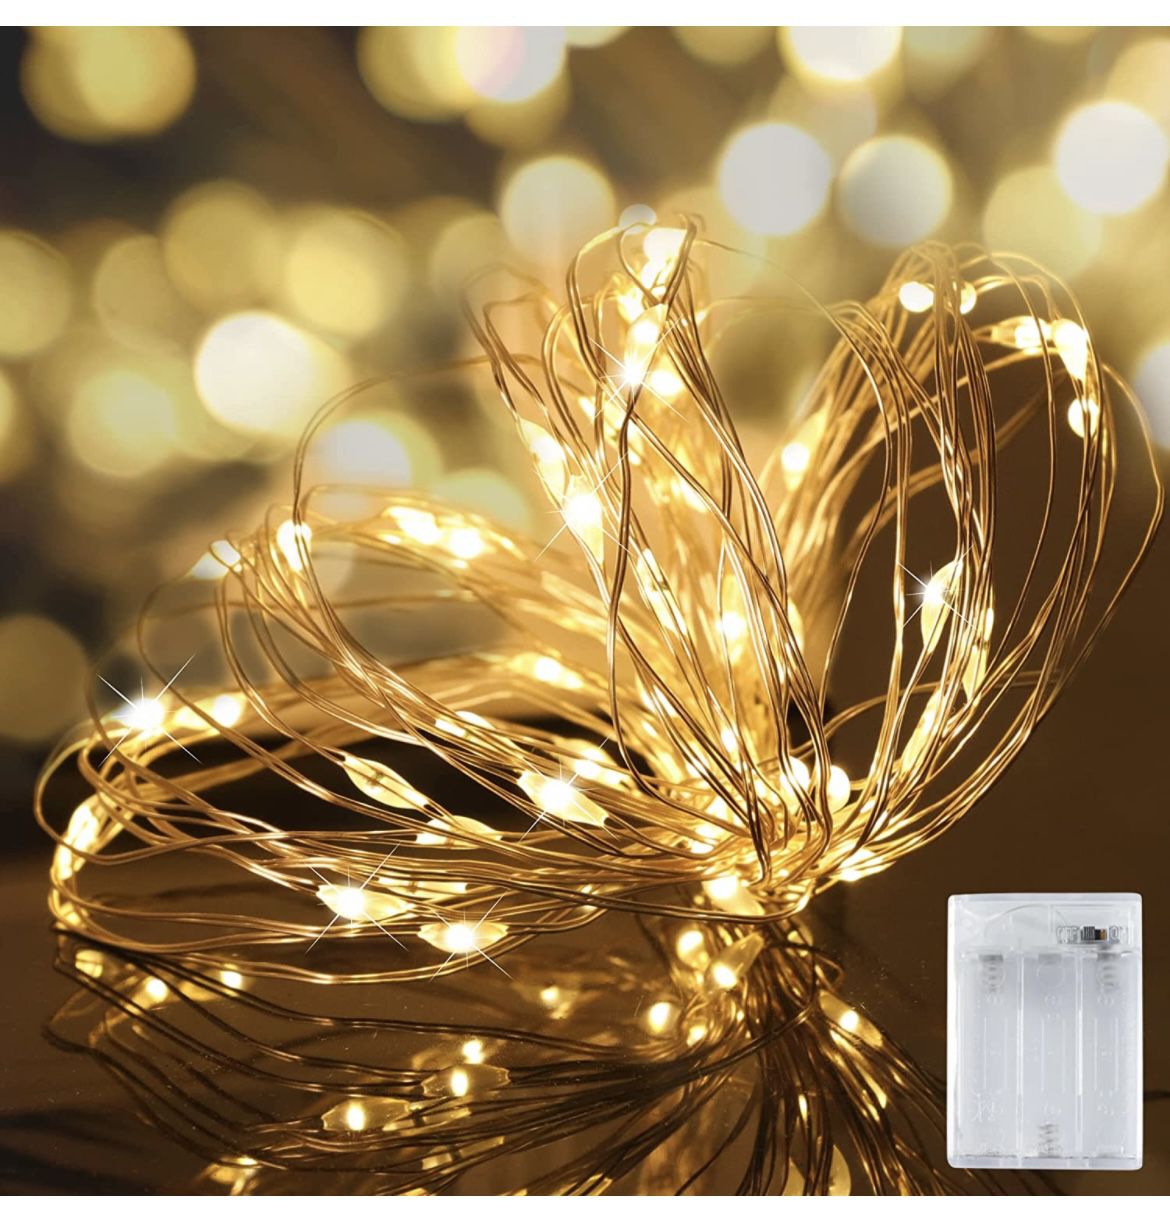 Yogle Fairy Lights Battery Operated,60 LED Mini Silver Copper Wire String Lights Battery Powered for Bedroom,Wedding, Parties,Christmas, Centerpiece, 